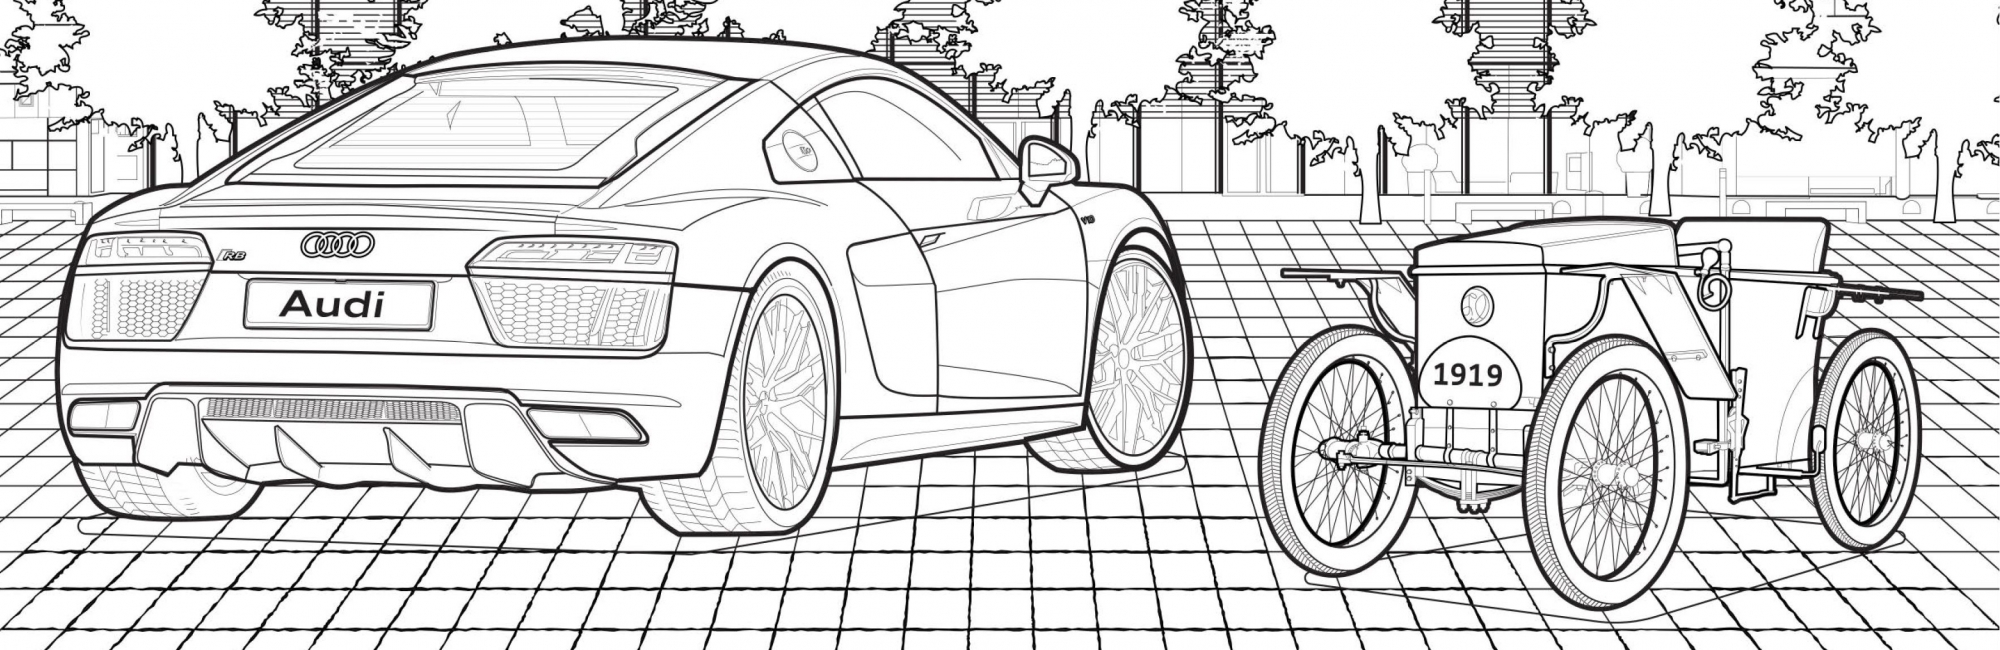 96 Car Coloring Pages Audi Latest HD - Coloring Pages Printable